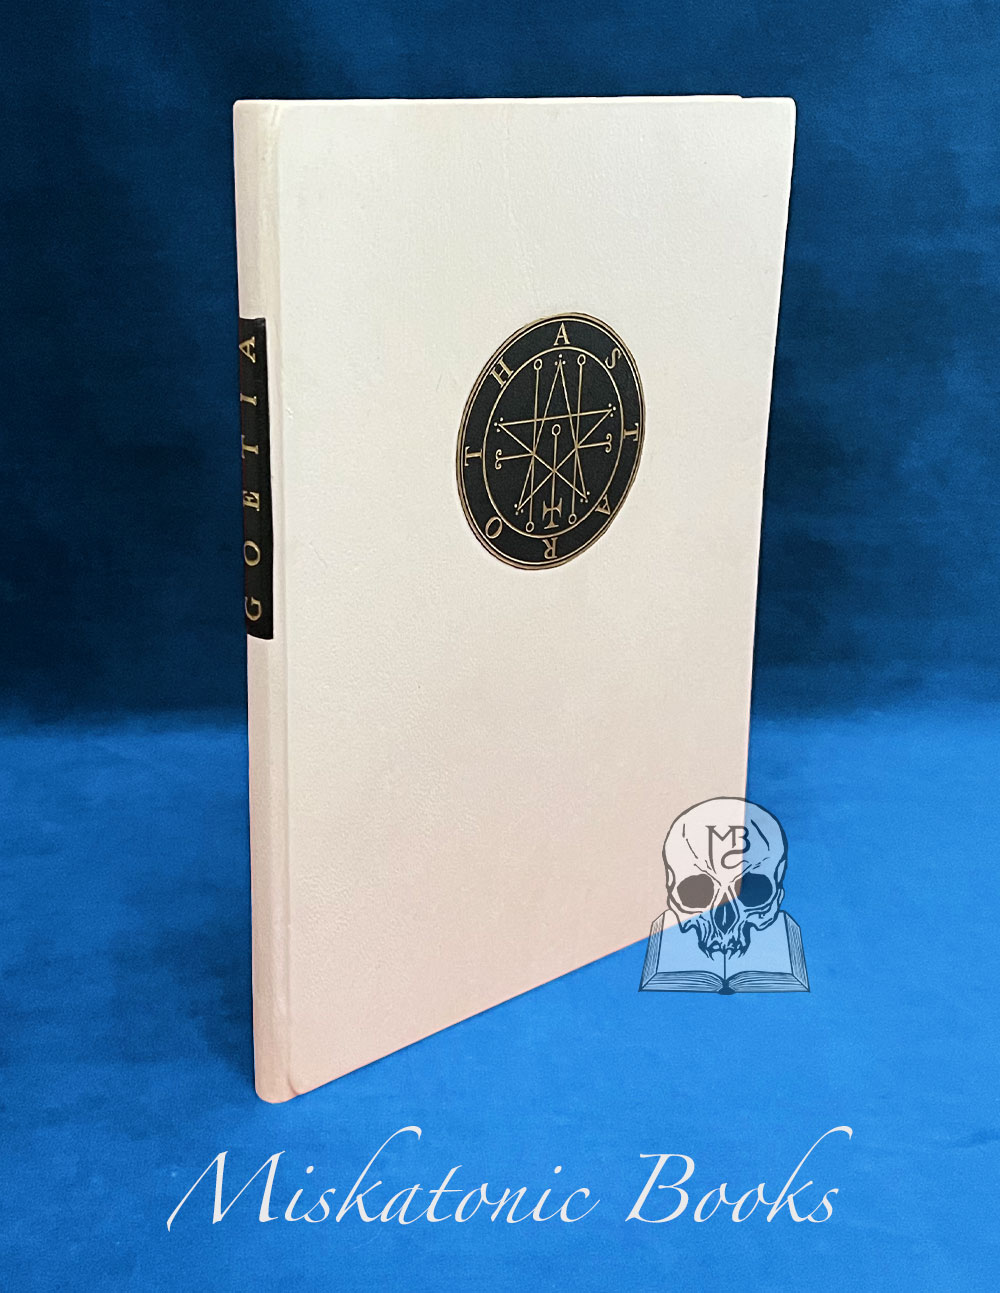 BOOK OF THE GOETIA OF SOLOMON THE KING, Being a Facsimiles of Aleister Crowley's Own Edition - SPECIAL Deluxe Edition Bound in Vellum 1 of 11 Copies